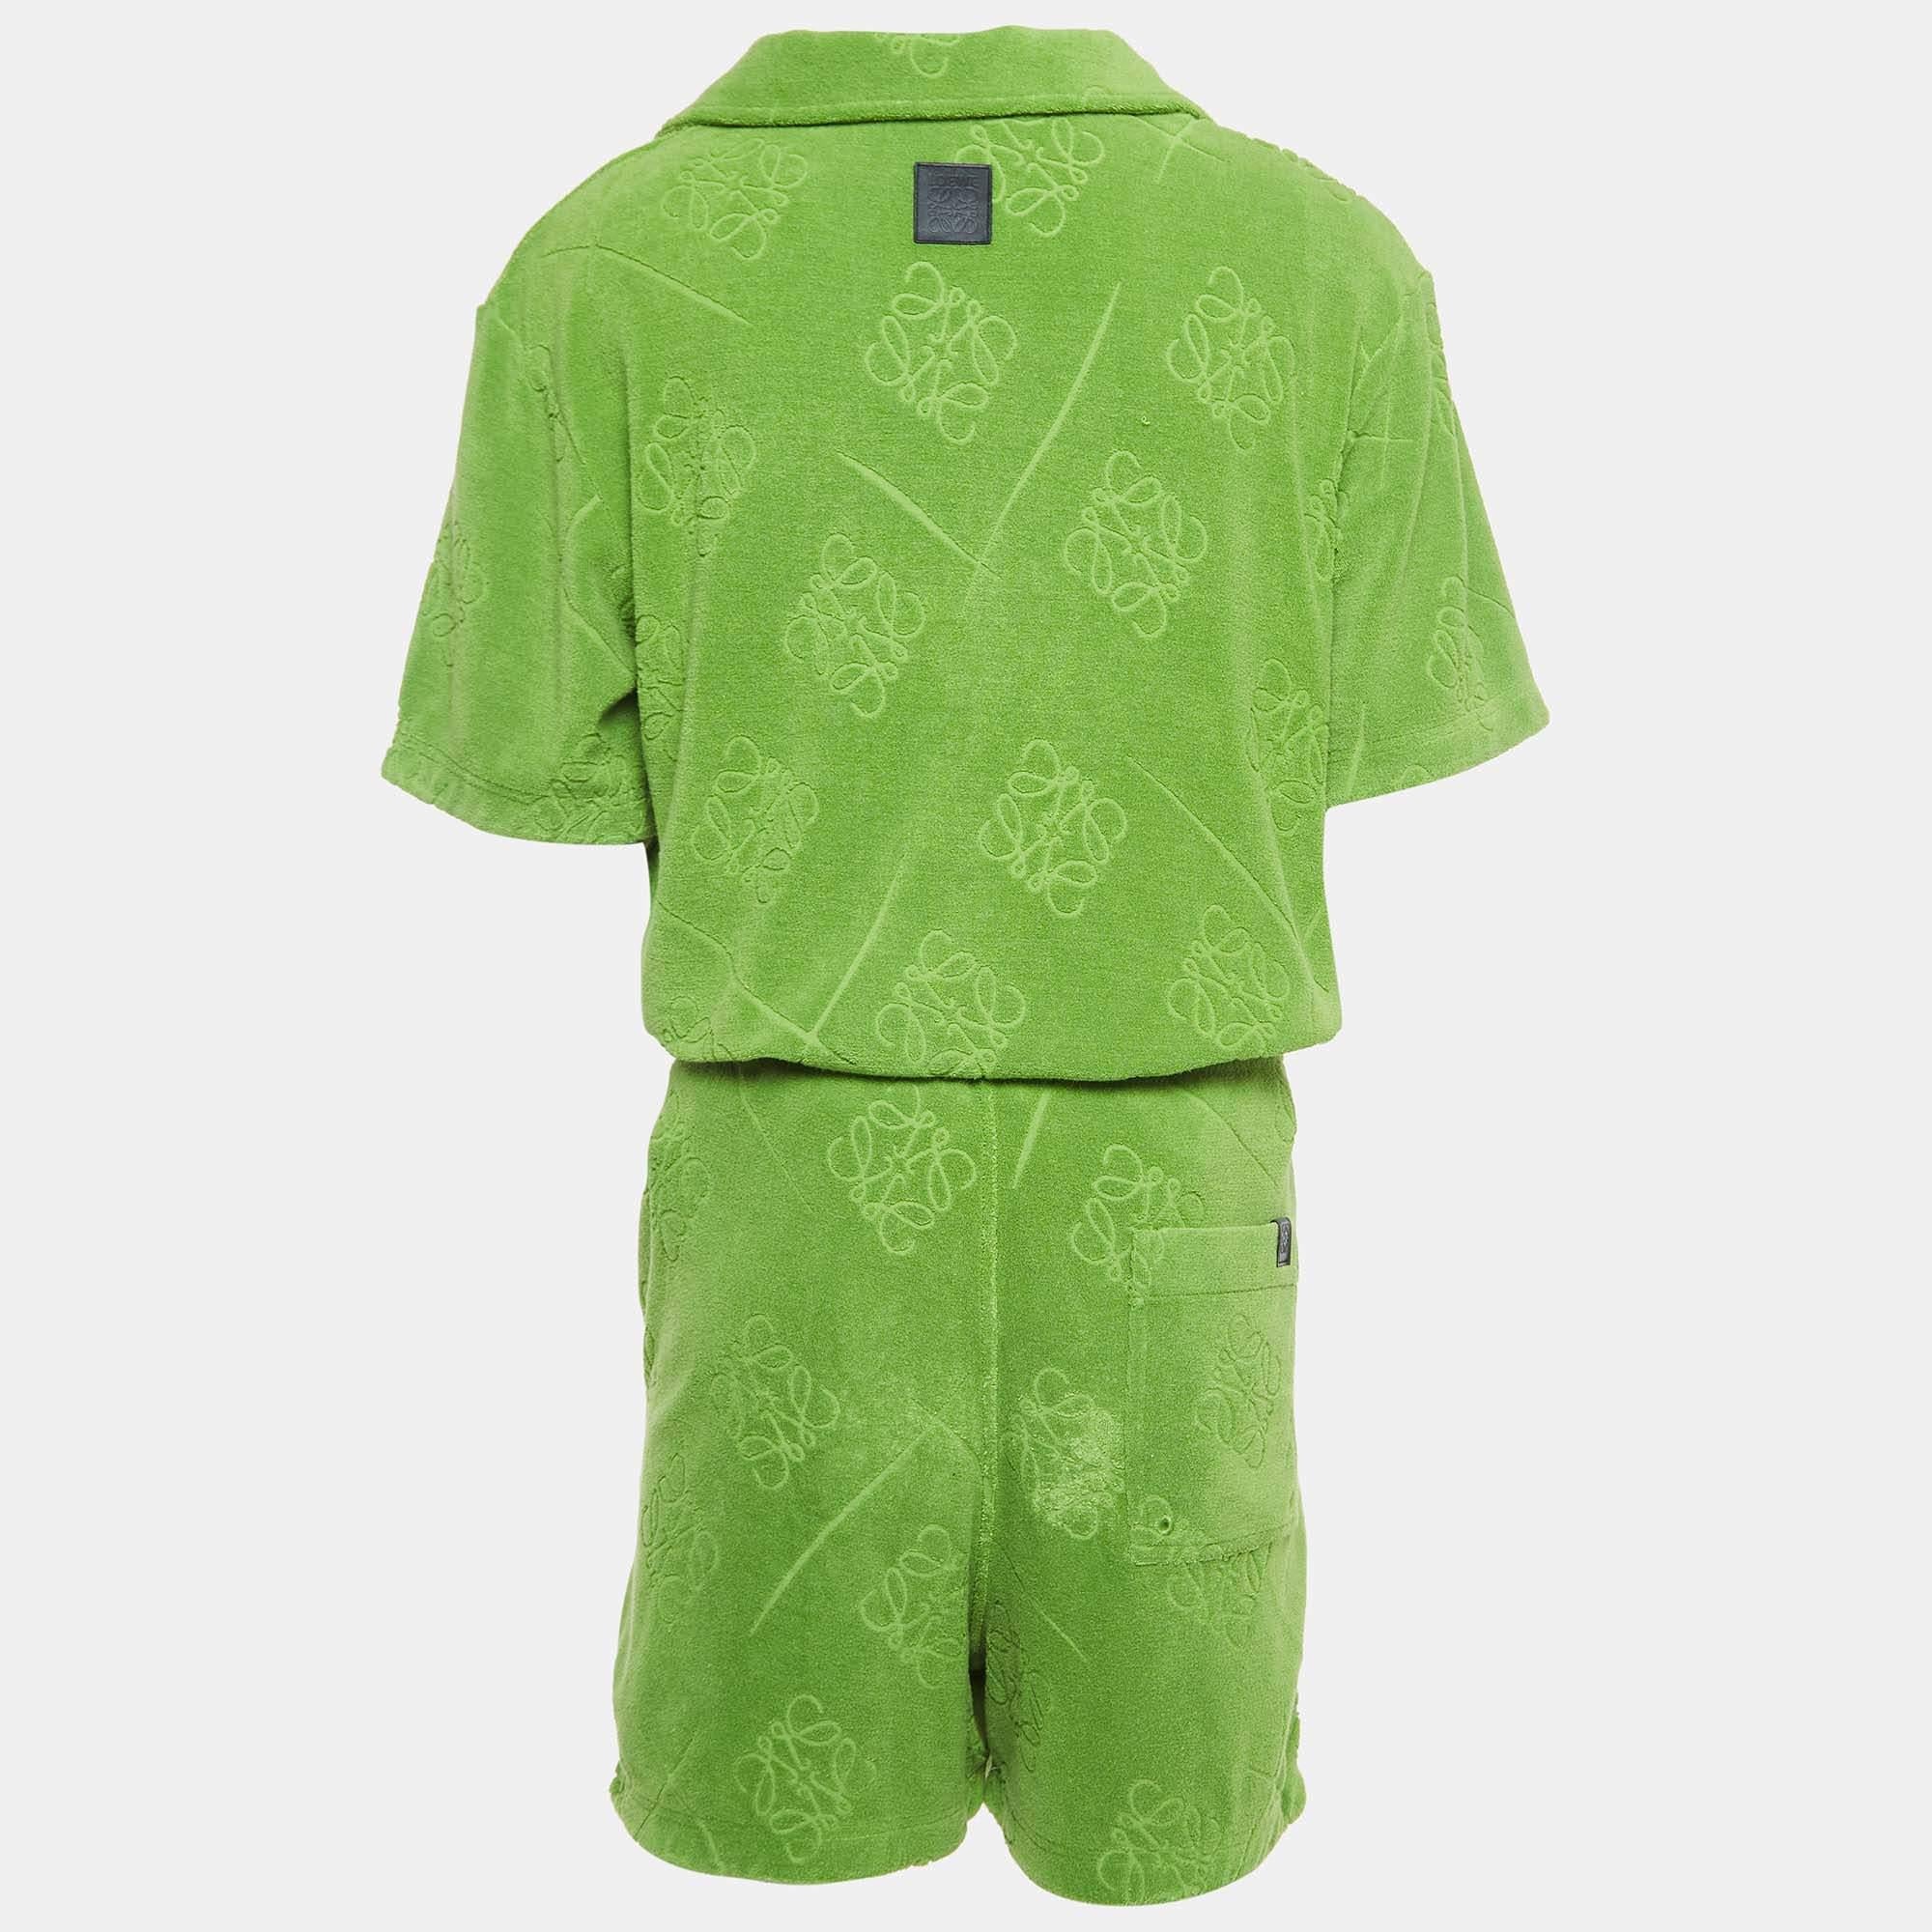 Loewe x Paula Ibiza collection is crafted with playful details and trendy colors. Crafted from terry cotton, this shirt & shorts set features green anagram , short sleeves and a relaxed silhouette.

